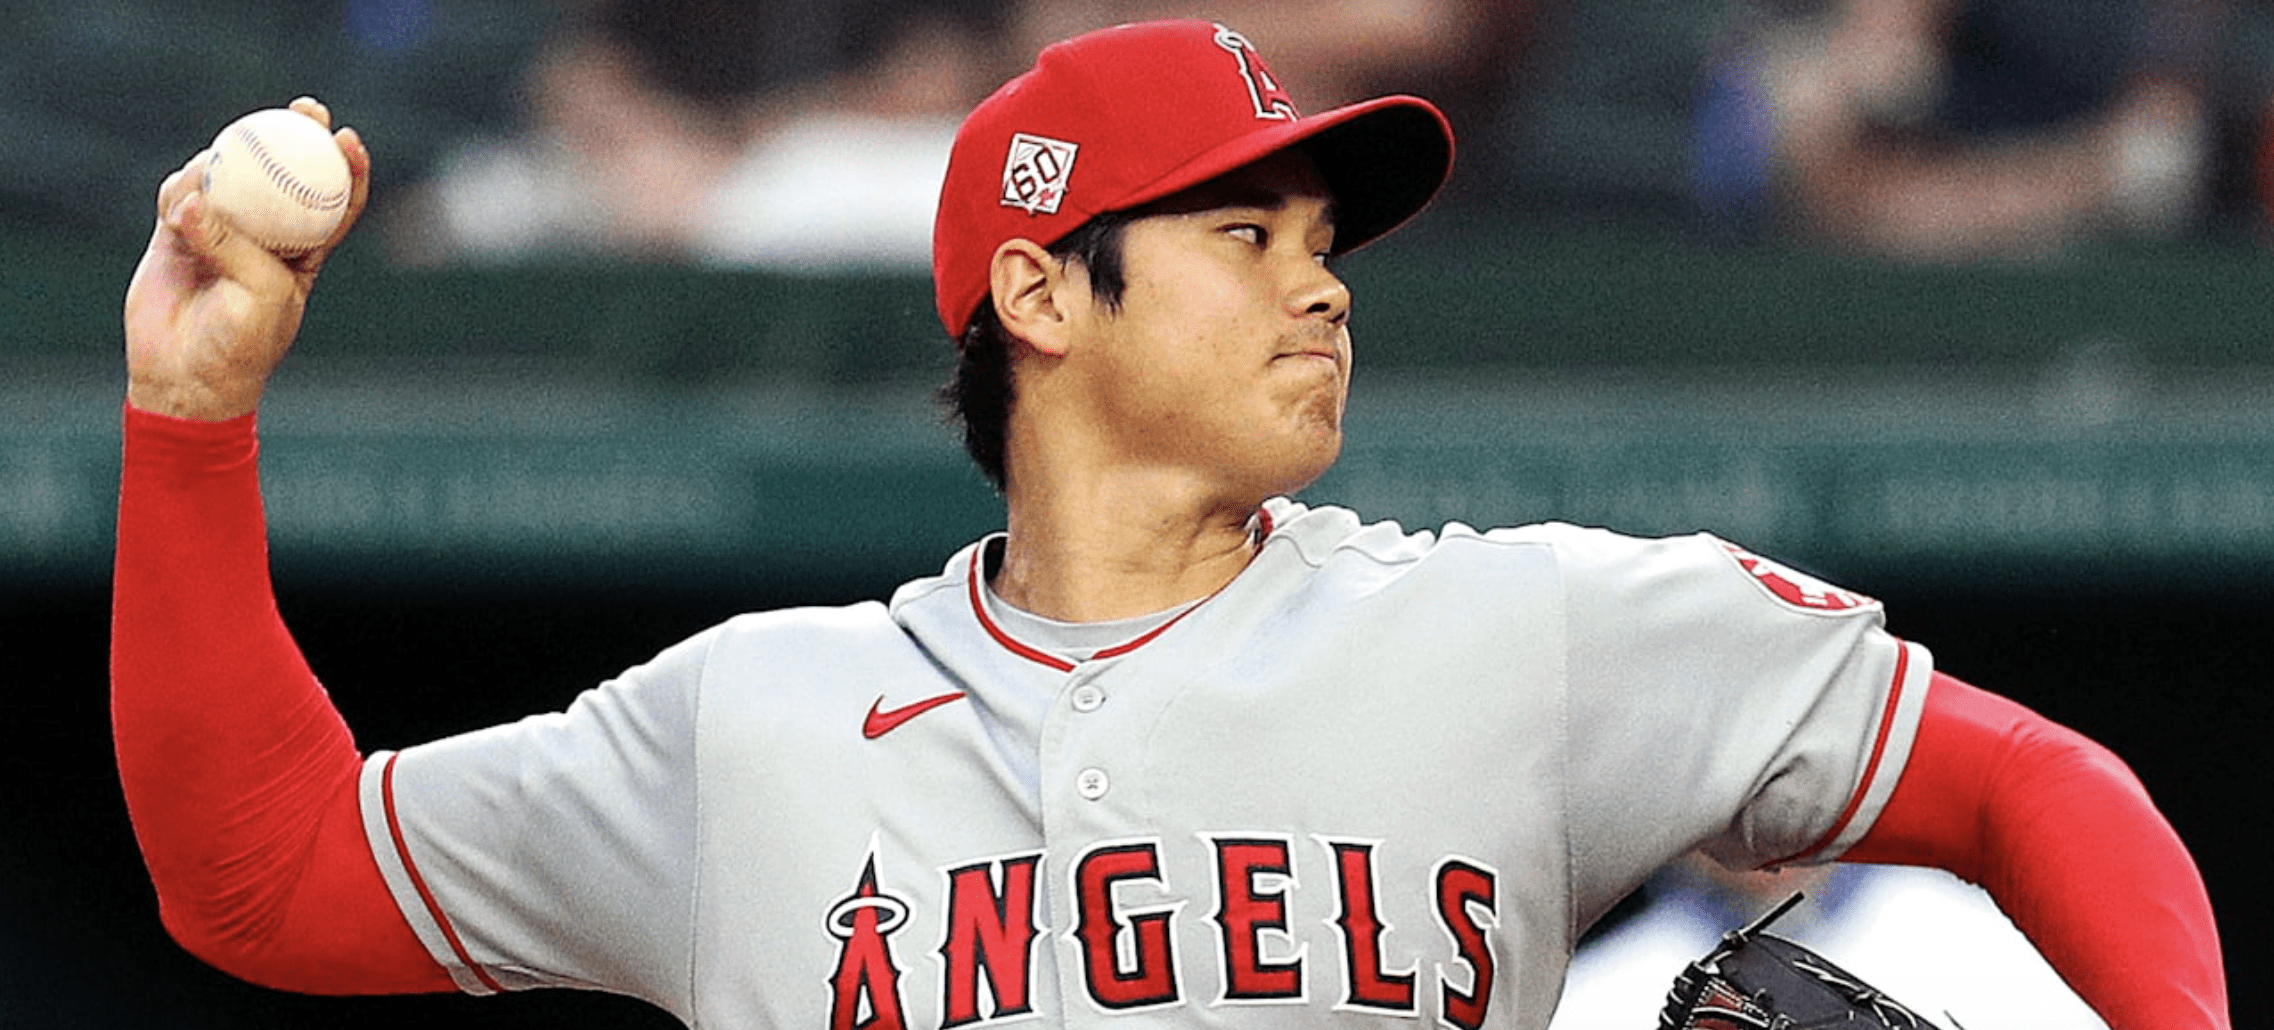 Ohtani for MVP: statistically, there’s no competition